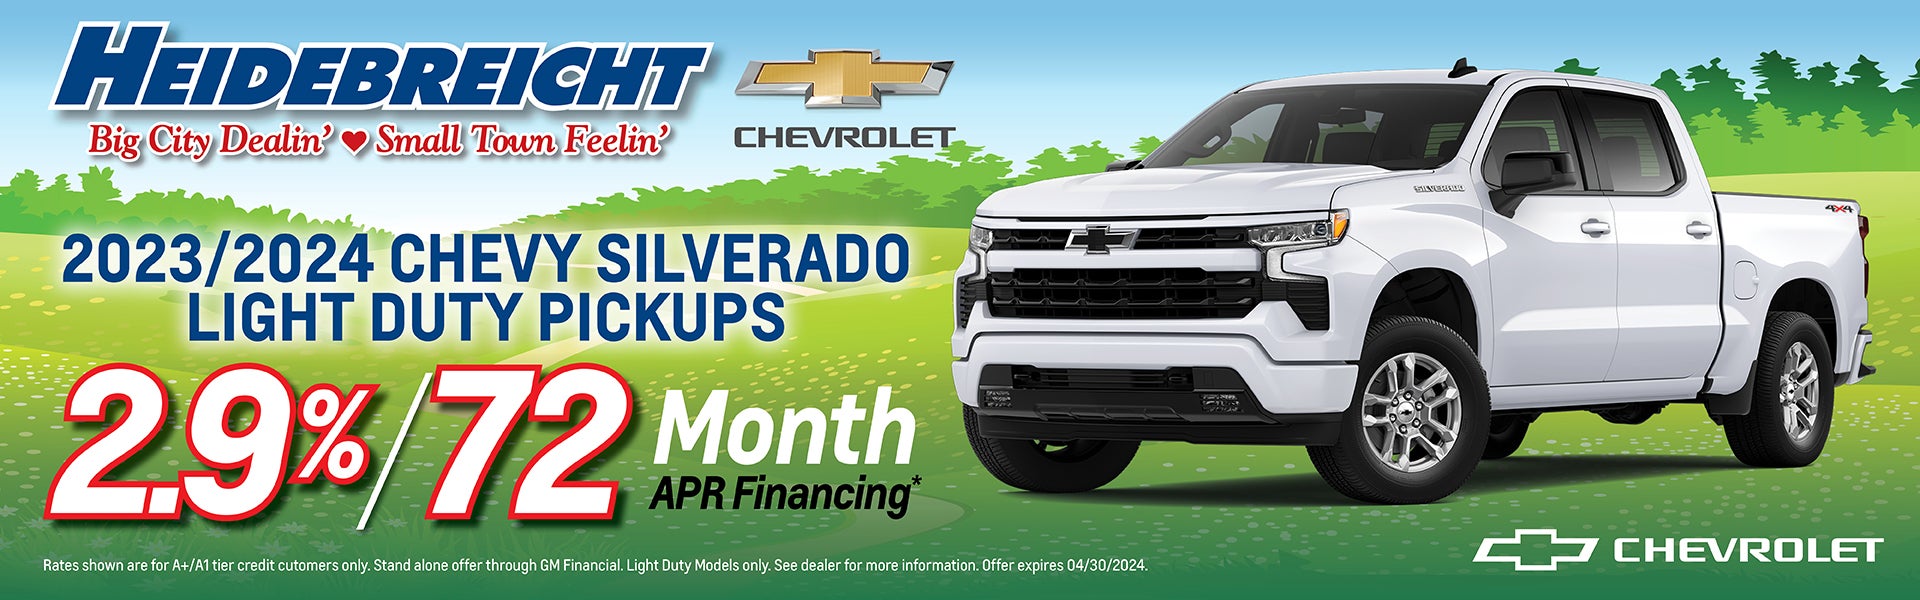 Low Rate Financing Available for 2023/2024 LD Silverados